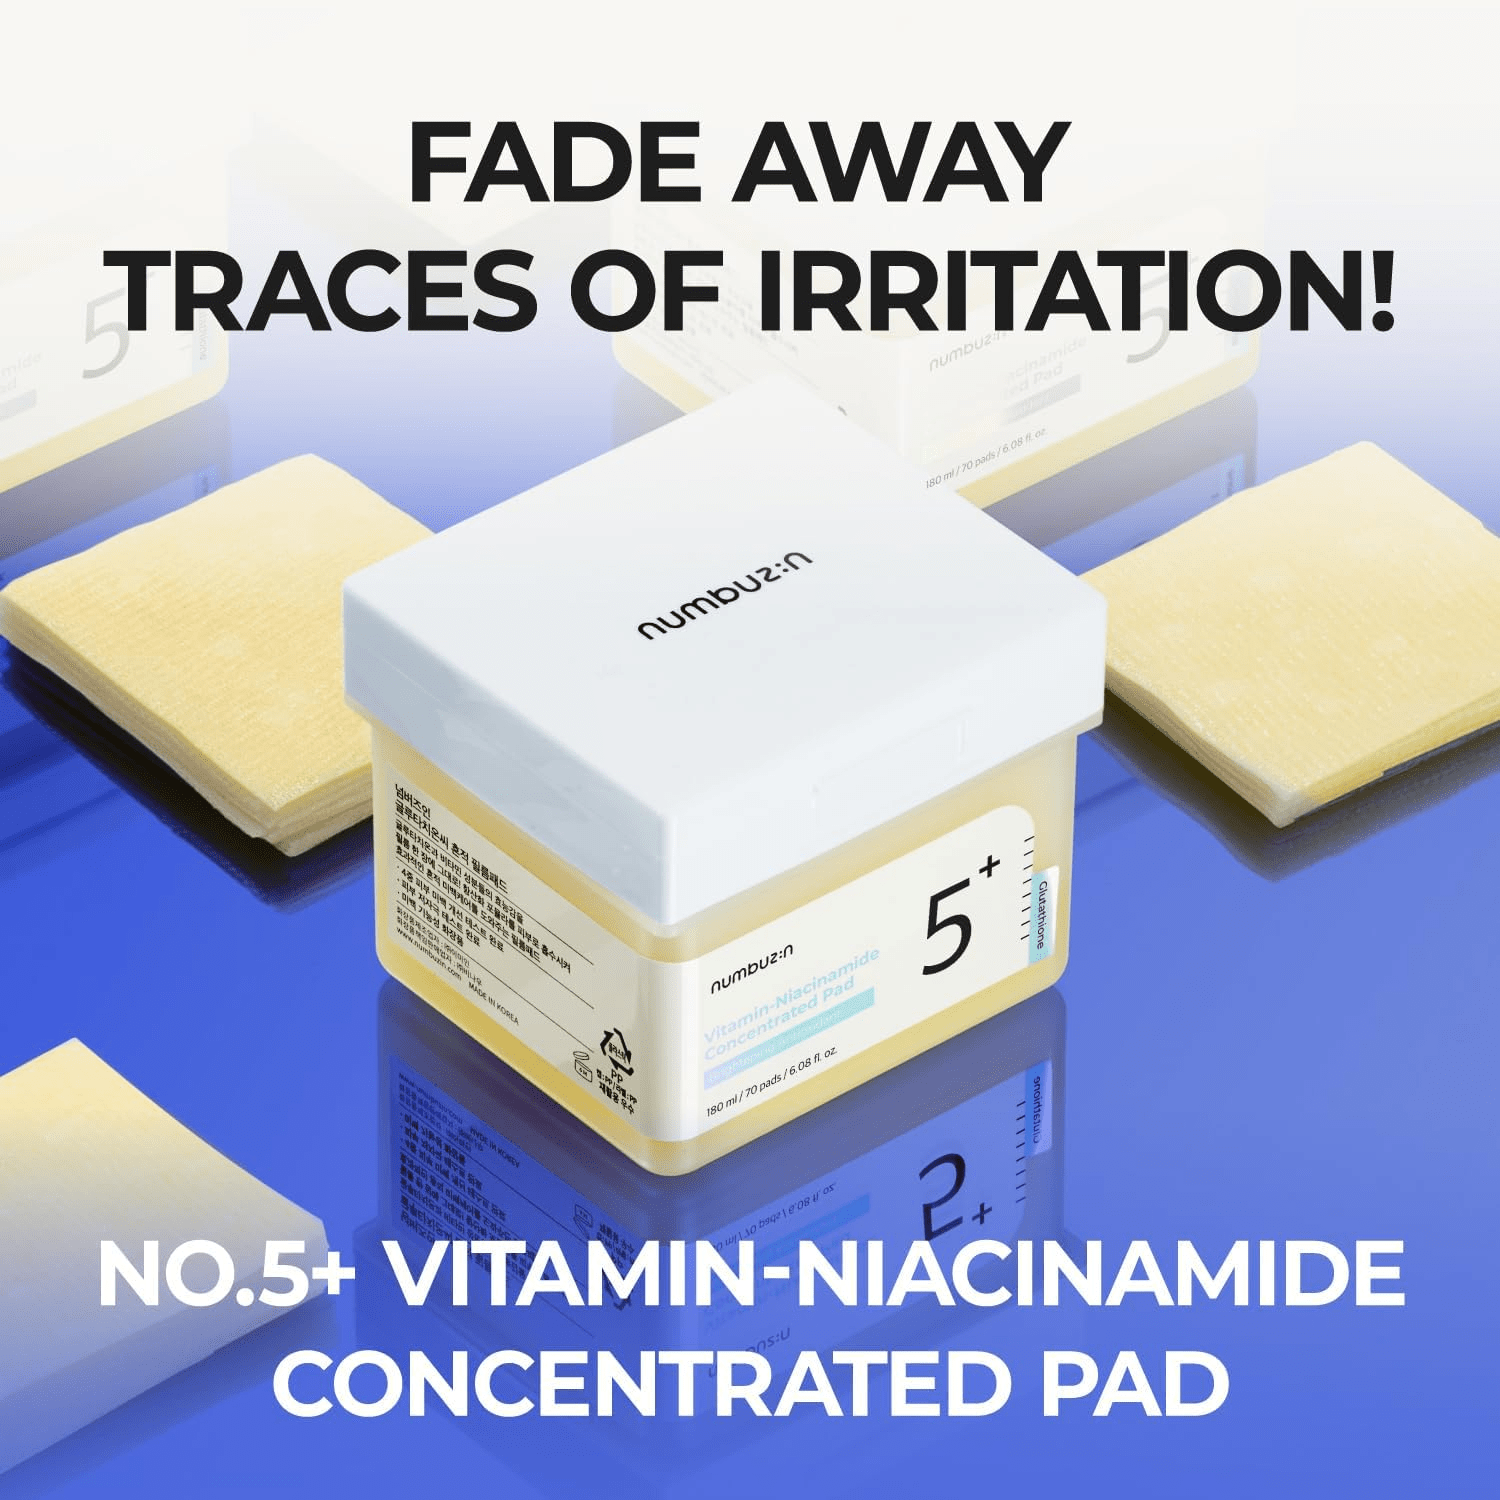 skincare-kbeauty-glowtime-numbuzin 5+vitamin niacniamide concentrated pad